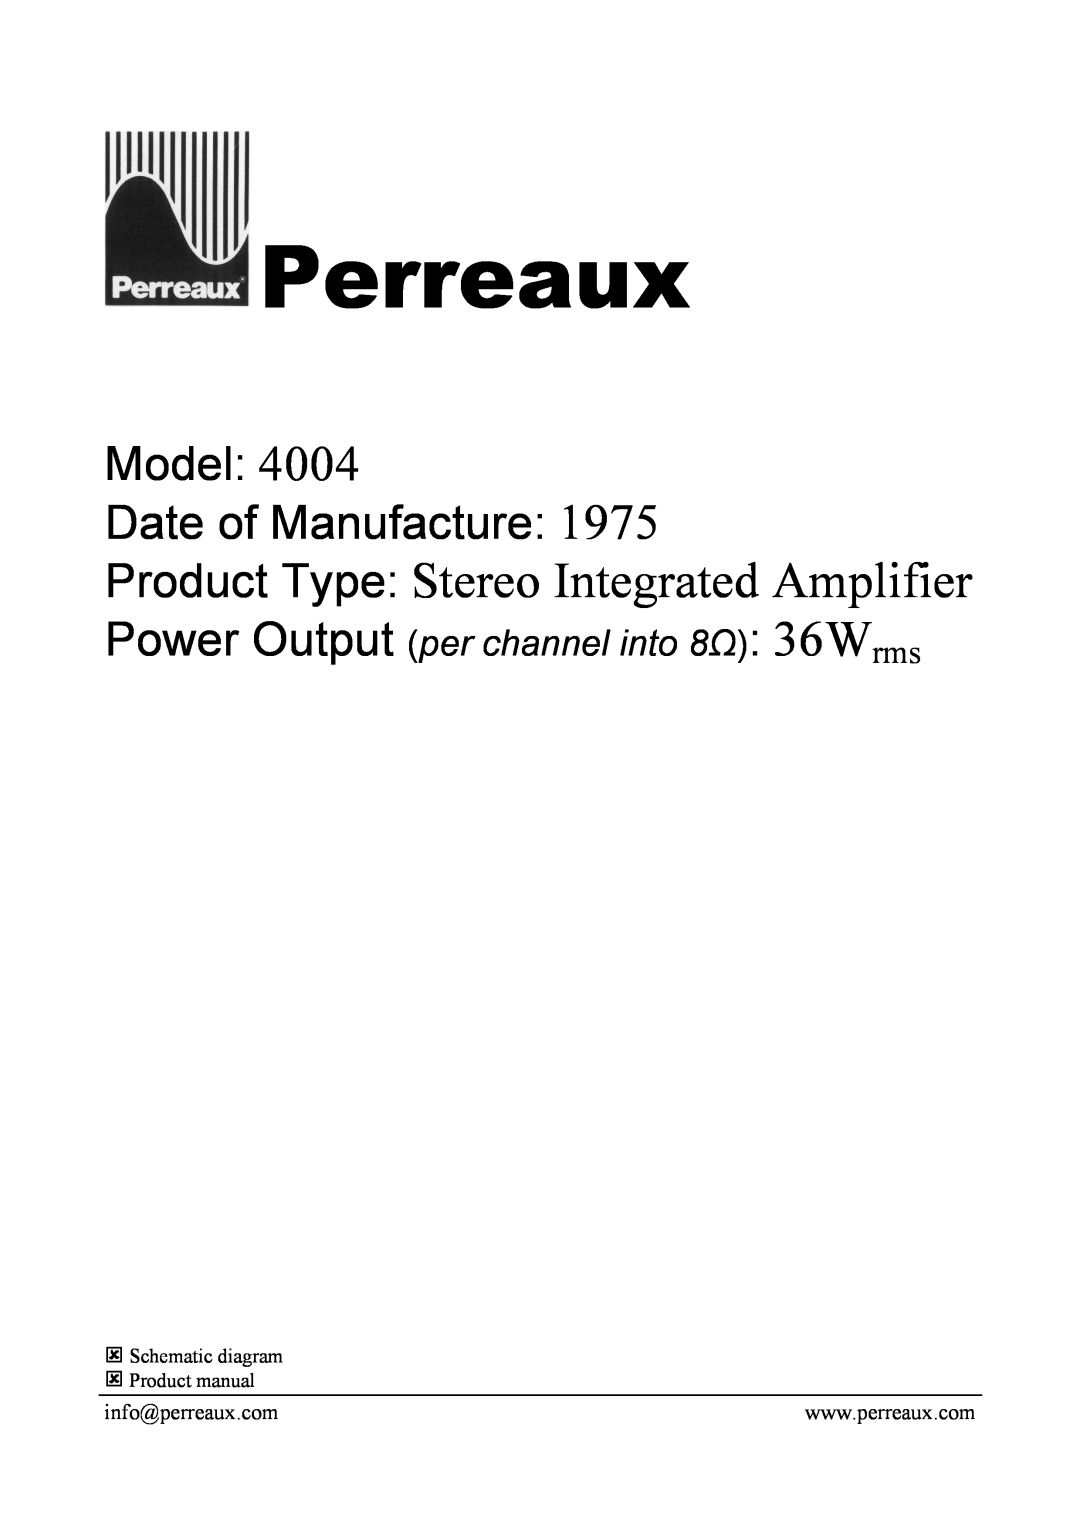 Perreaux 4004 manual Perreaux, Product Type Stereo Integrated Amplifier, Model Date of Manufacture 